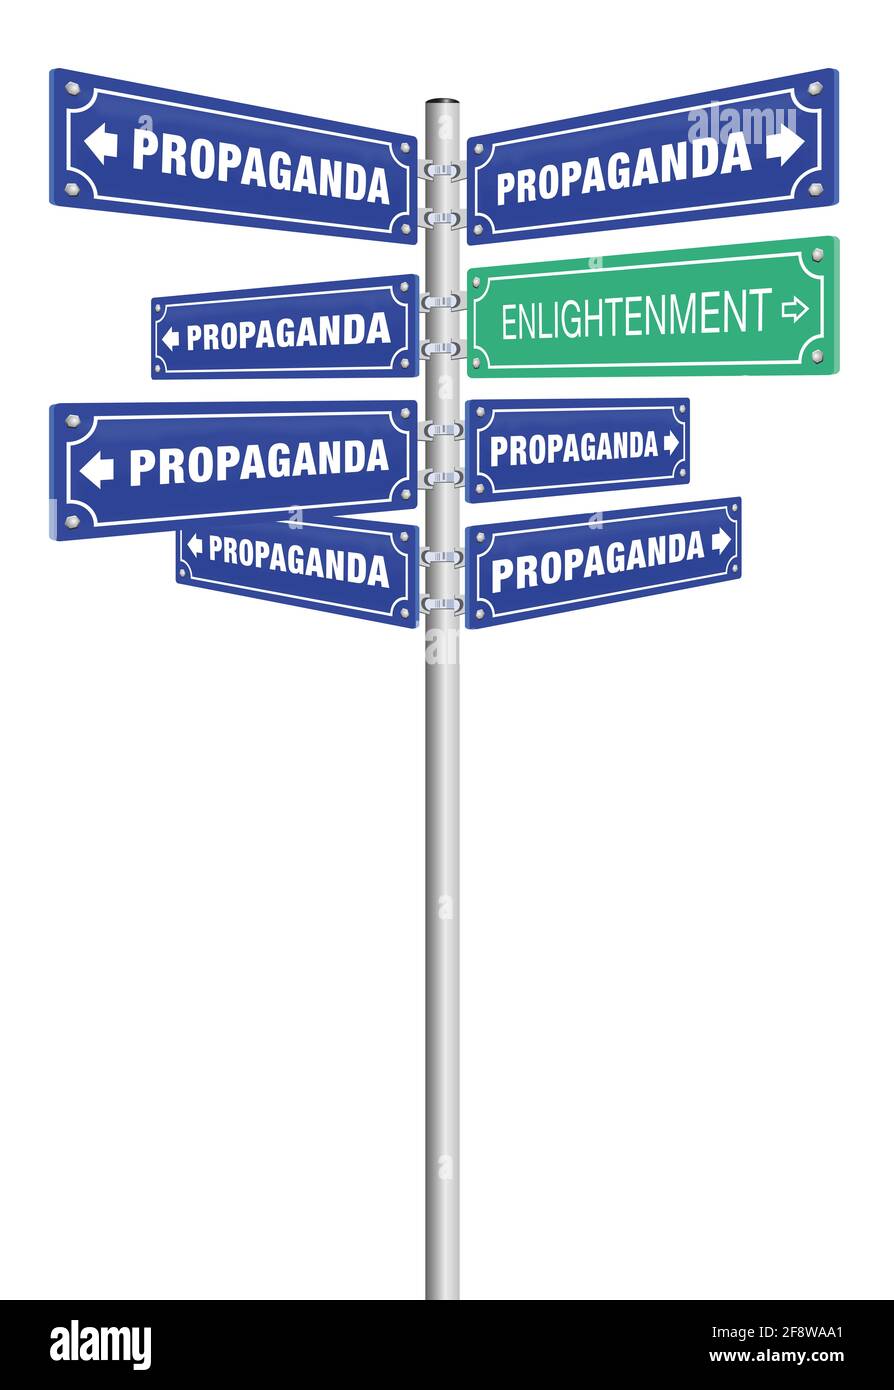 ENLIGHTENMENT PROPAGANDA traffic signs. Democracy or dictatorship, truth or lies in politics, facts or fake, verity or fraud, honesty or deception. Stock Photo